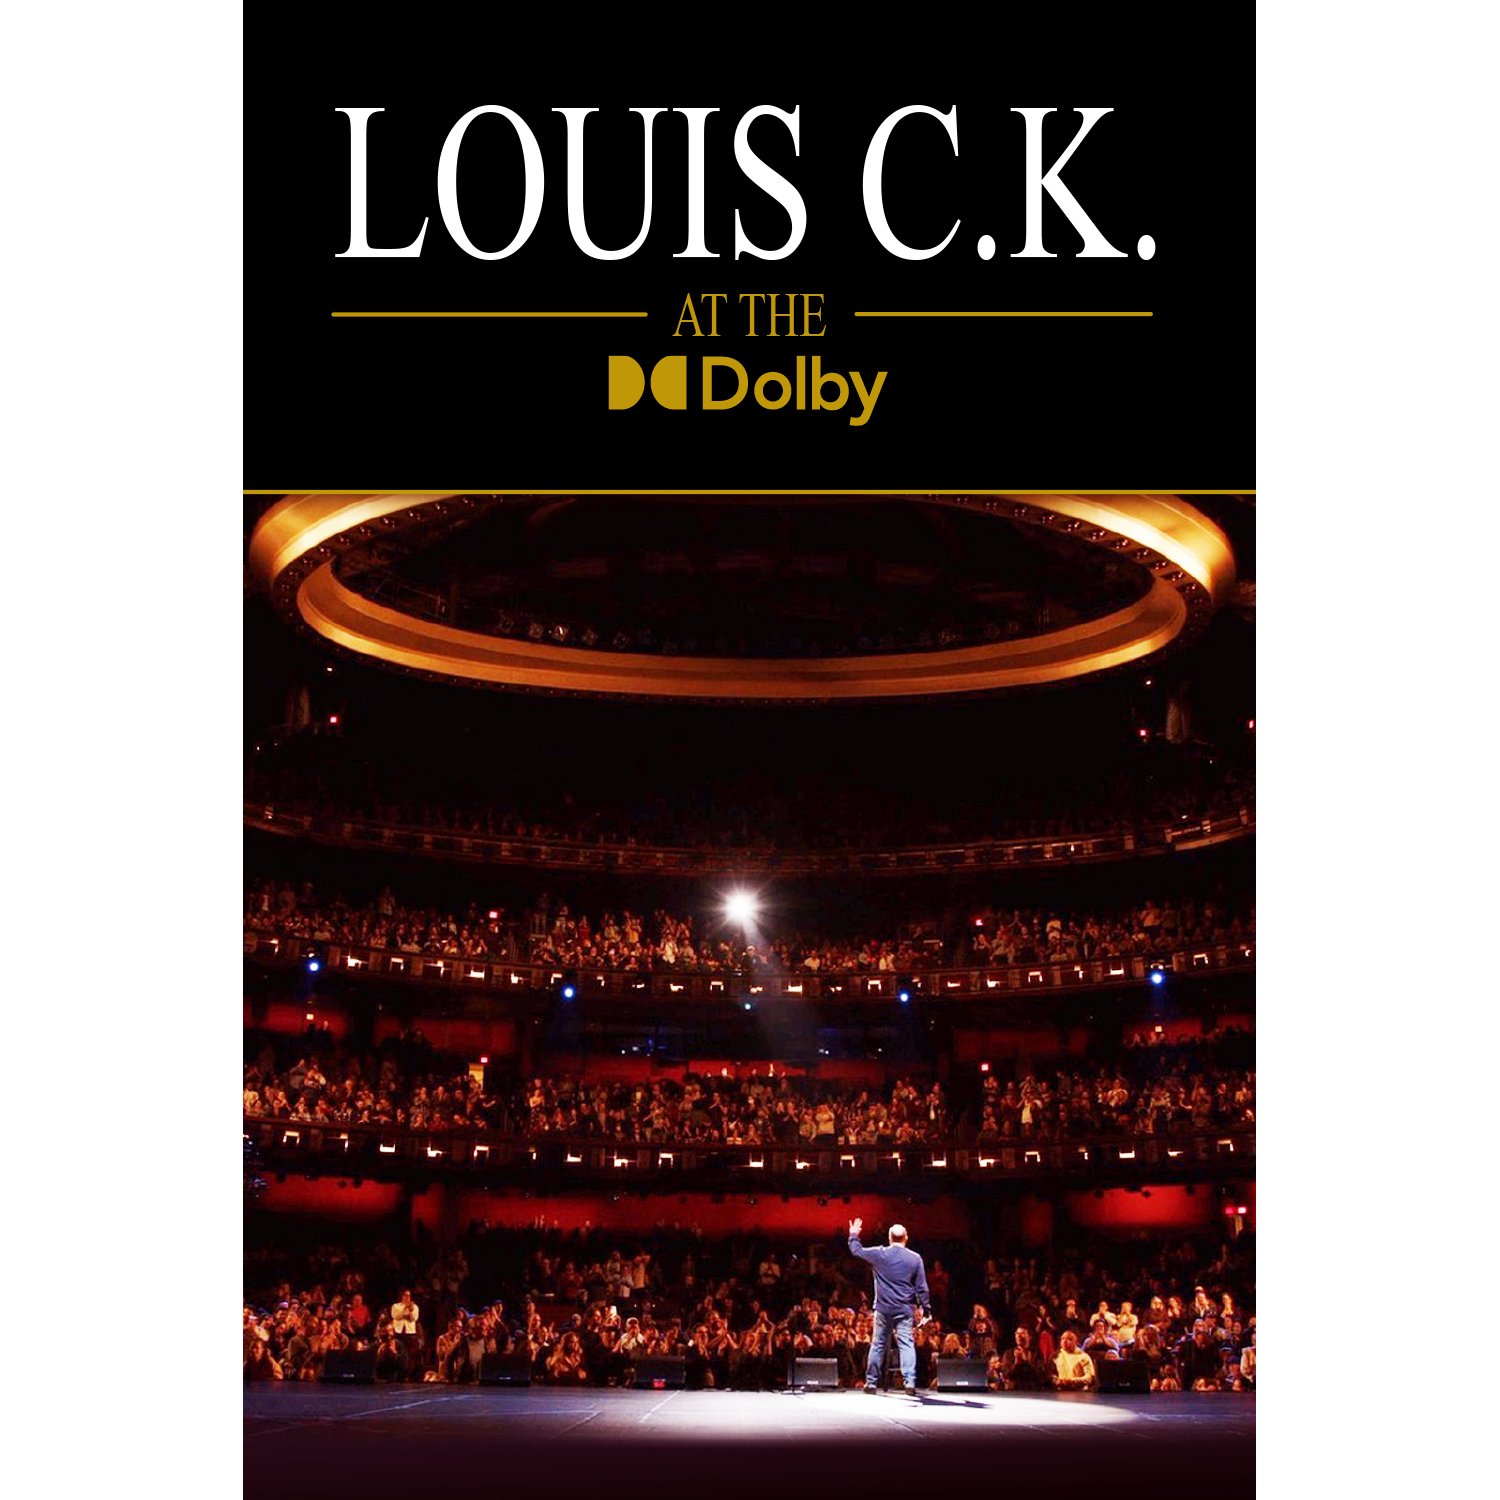 Certain things, if you're gonna say them, don't clear your throat in the  middle… Download & stream 'Louis C.K. at The Dolby' at the link…